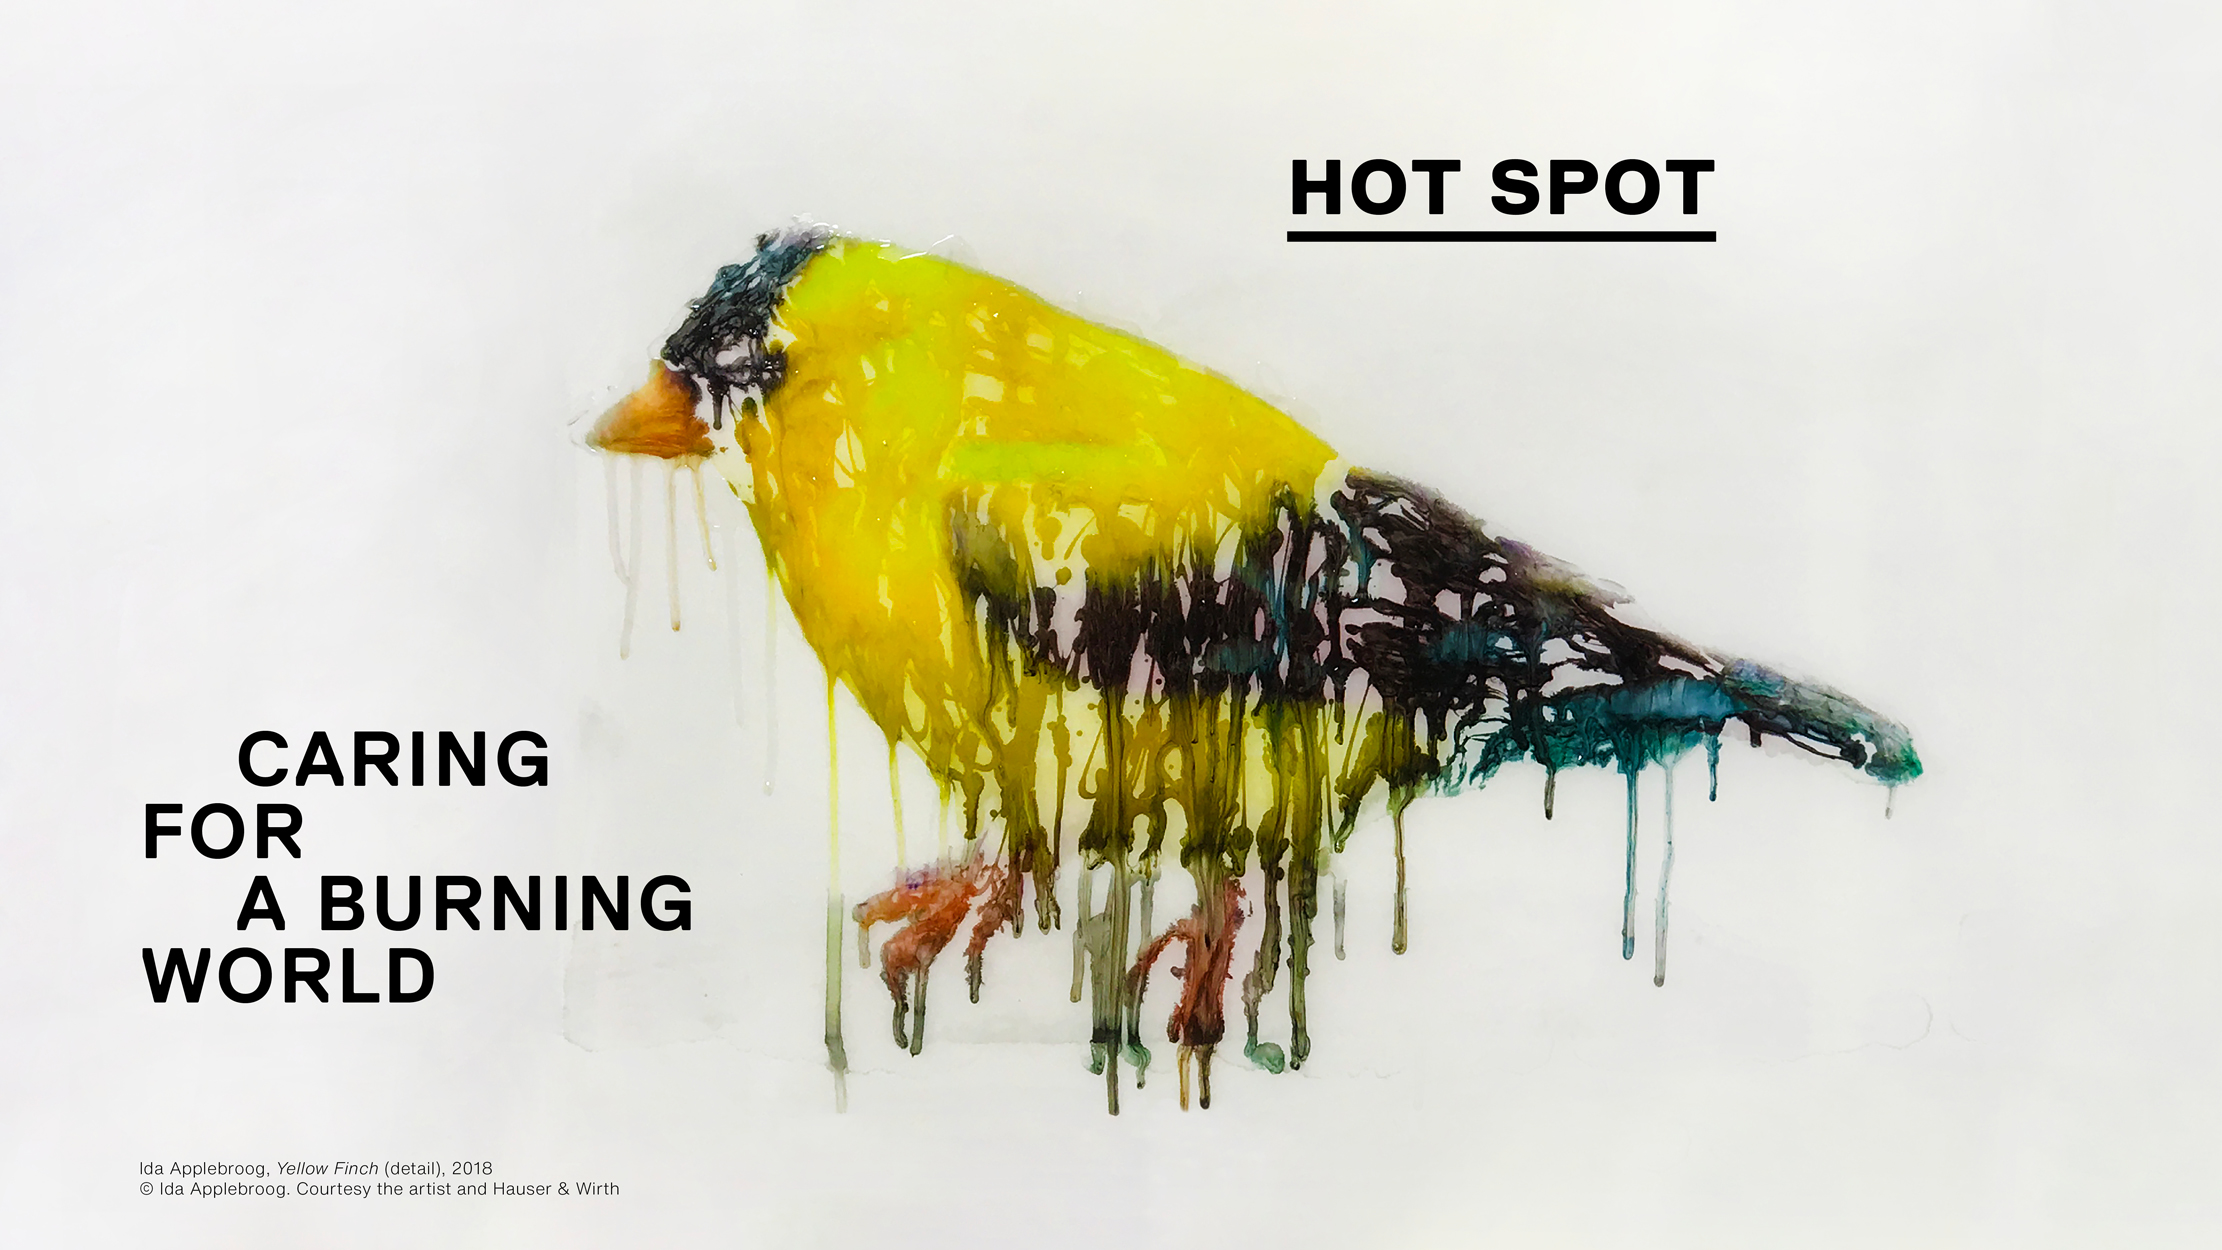 HOT SPOT – Caring For a Burning World